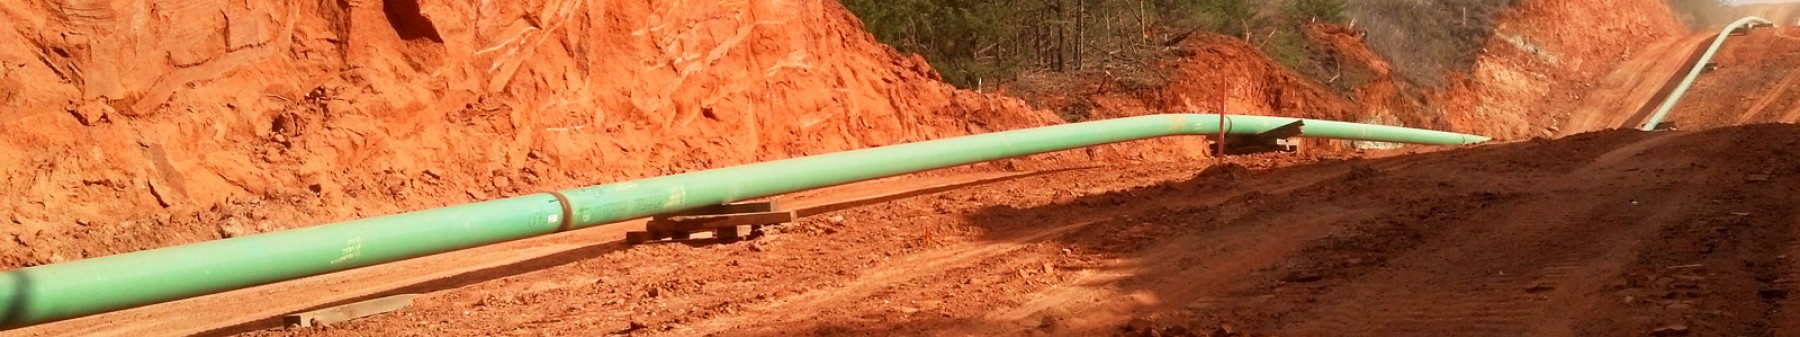 Pipeline Construction for Oil & Gas